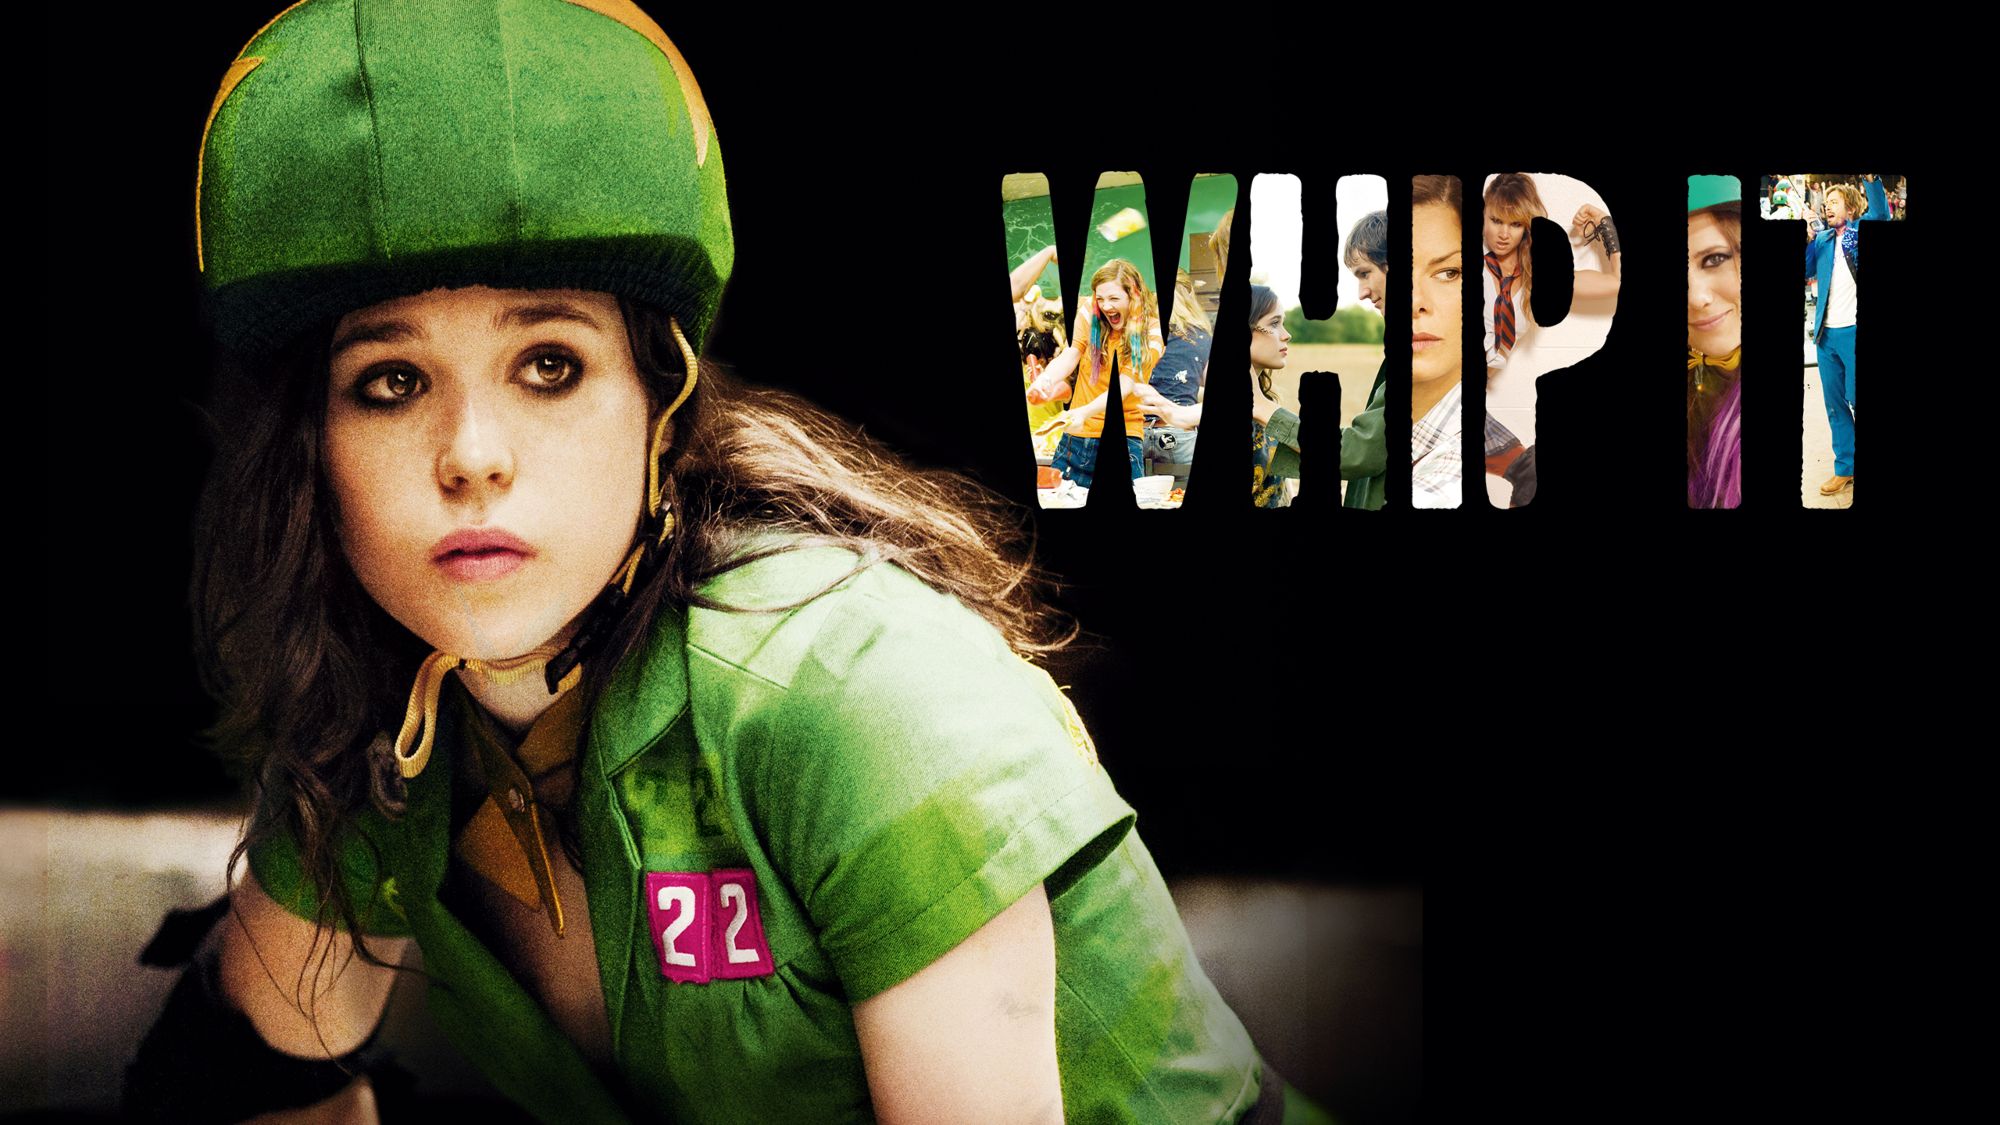 37-facts-about-the-movie-whip-it